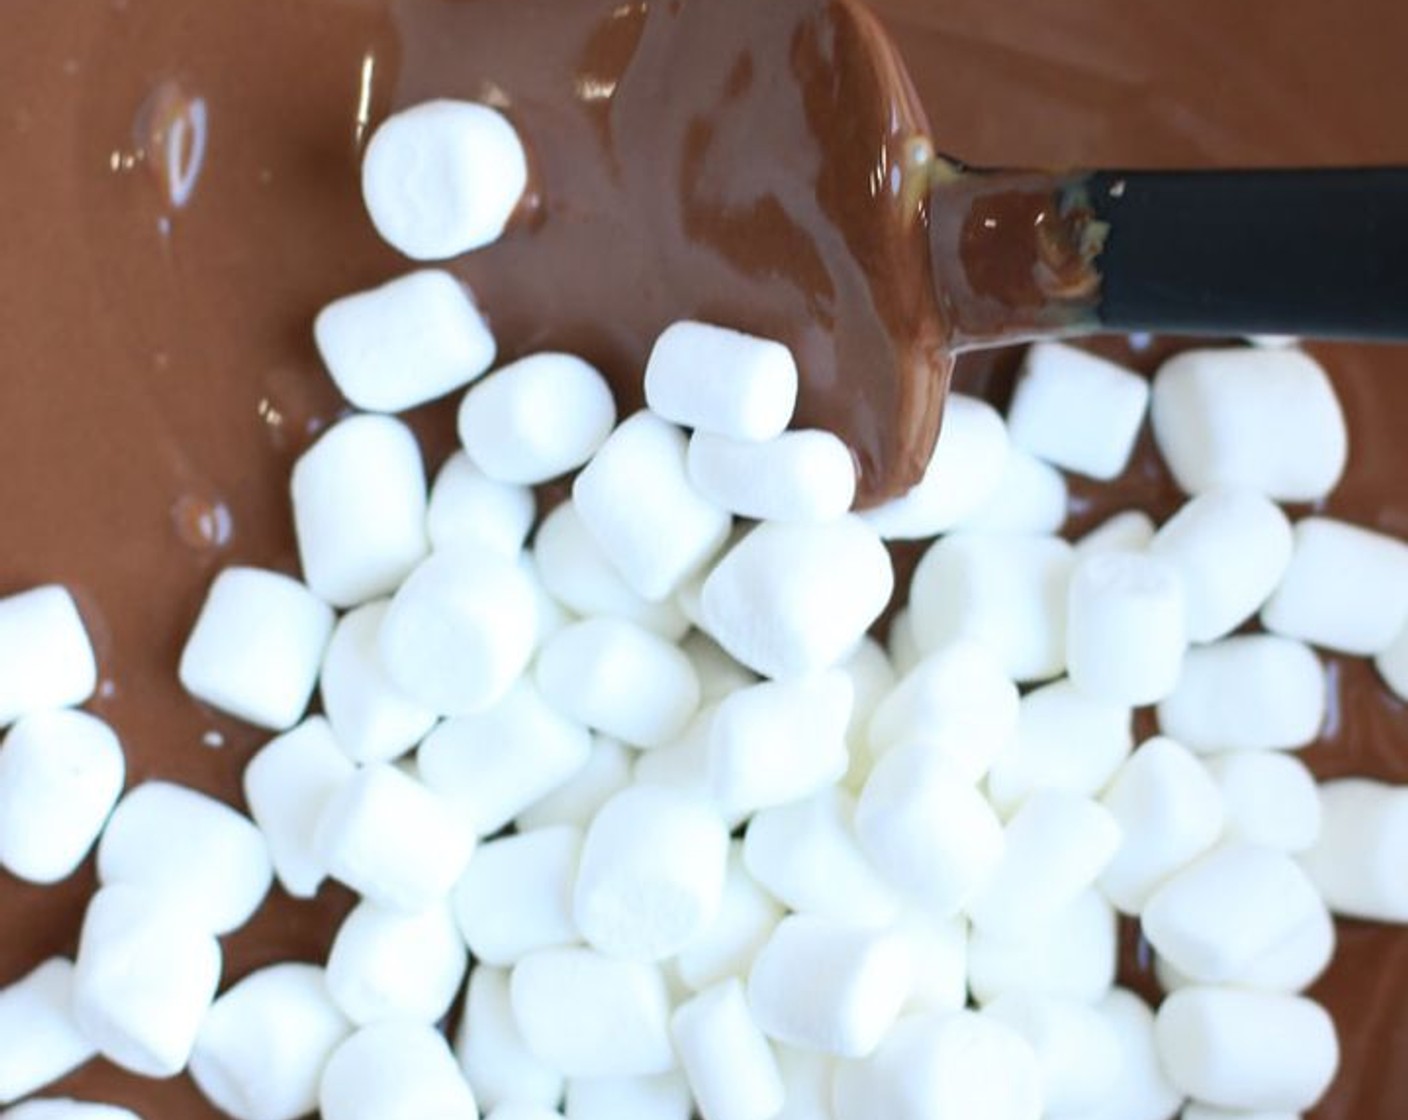 step 4 Stir in Mini Marshmallows (1 bag) and gently stir until marshmallows are evenly coated with the melted chocolate mixture.